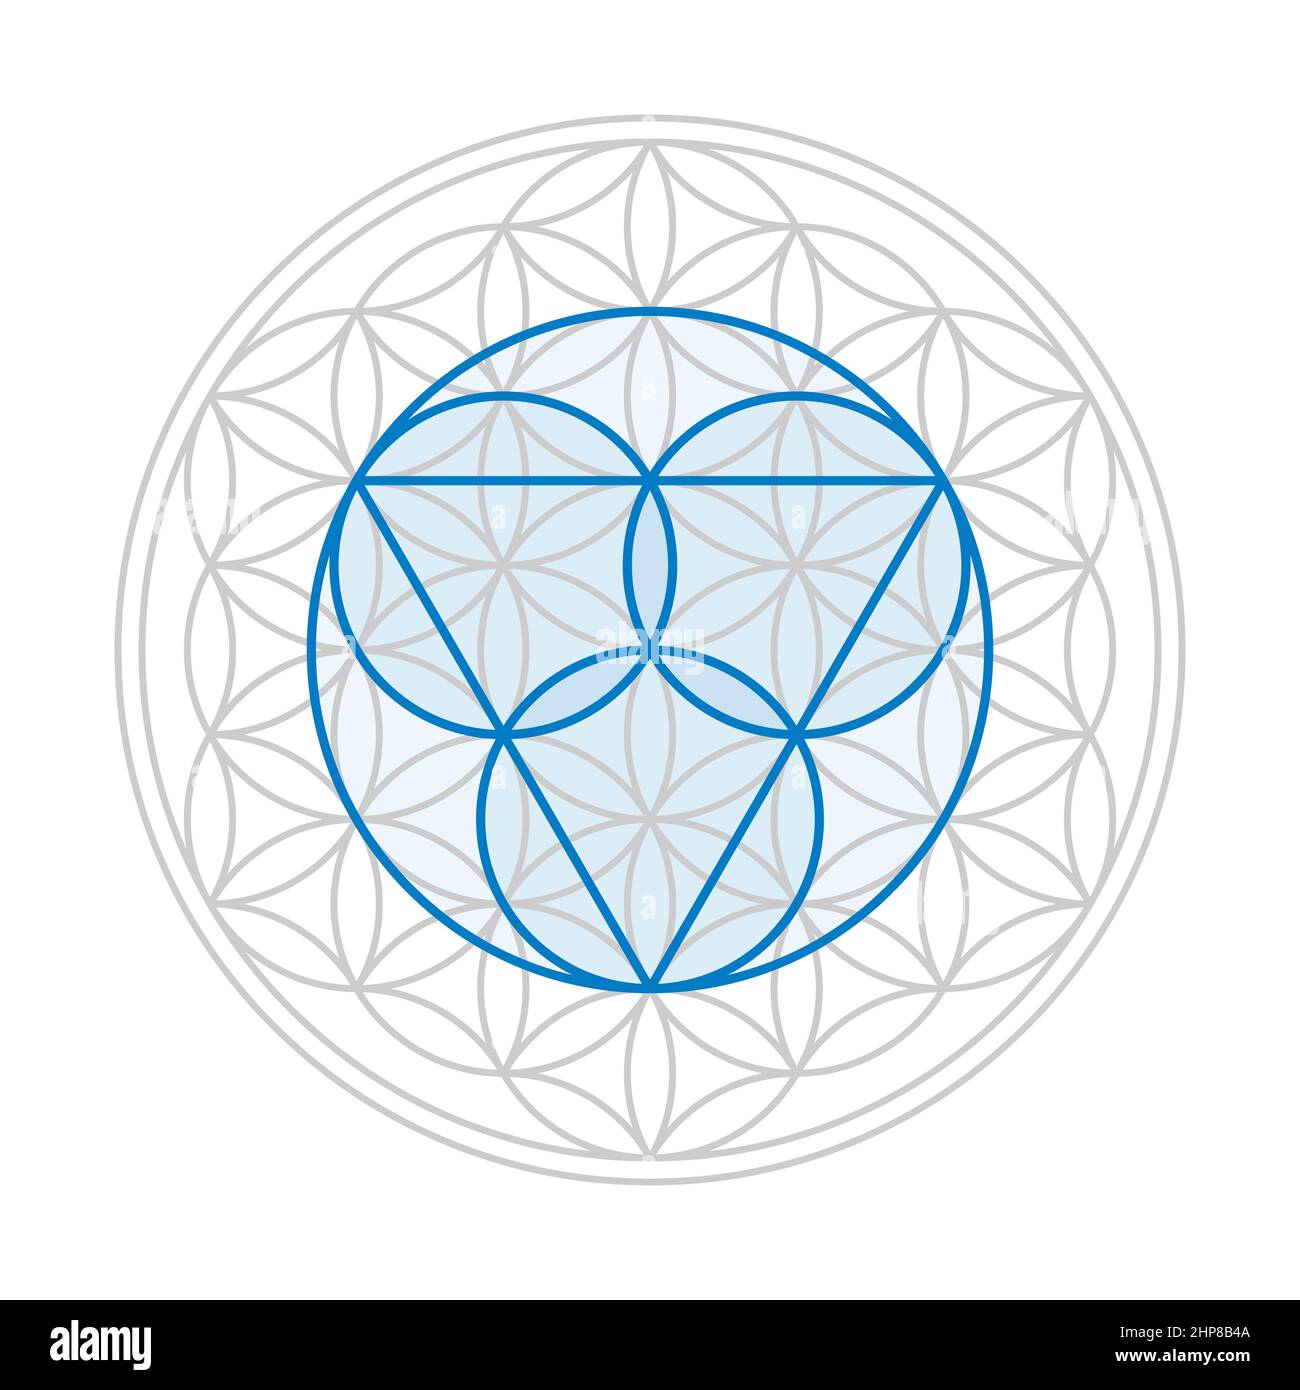 Blue trinity symbol, three circles for the Father, the Son Jesus Christ, and the Holy Spirit, over a gray Flower of Life, a geometrical figure. Stock Photo